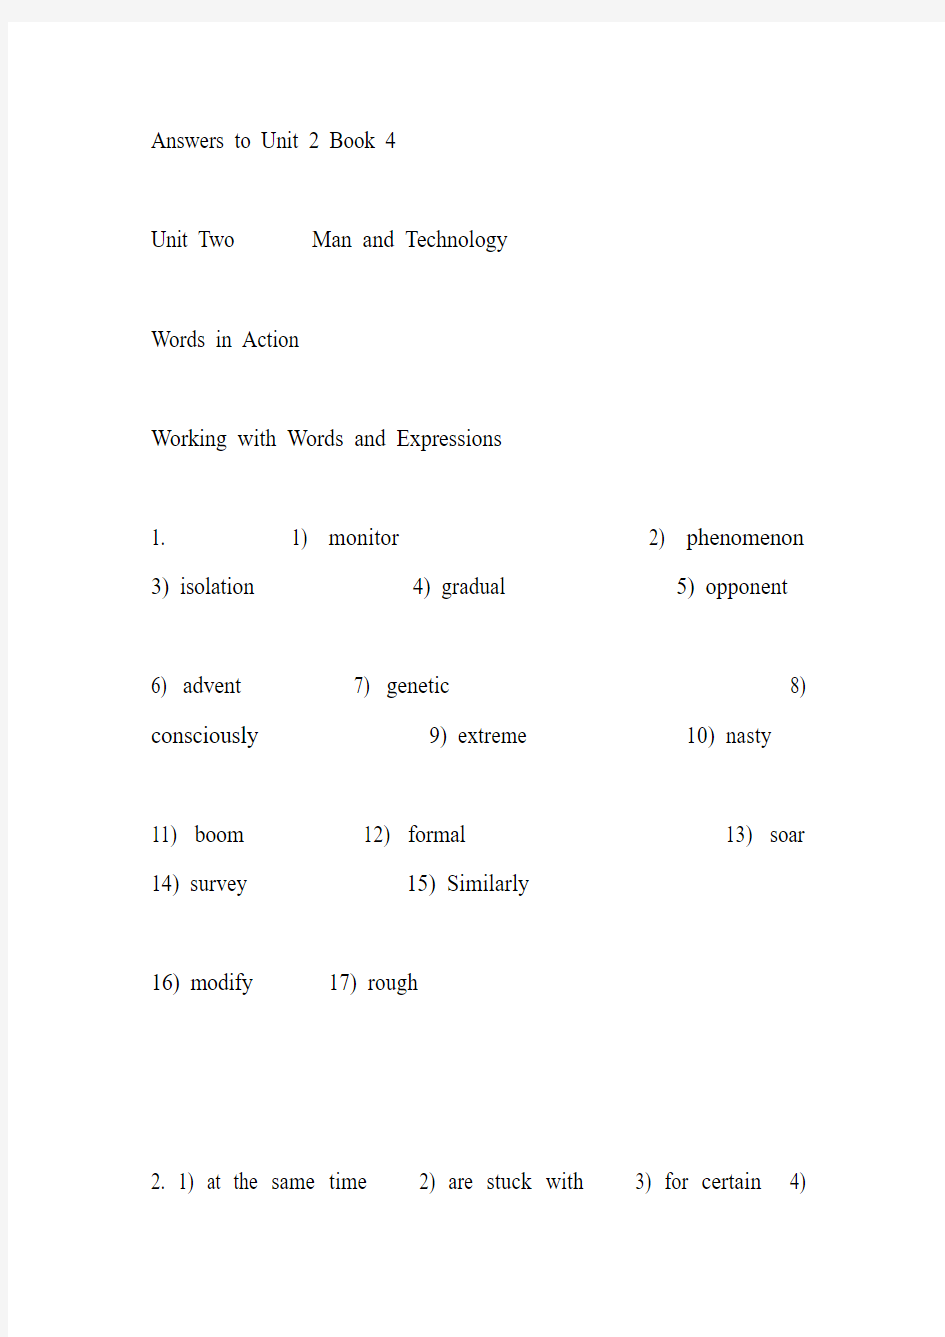 Answers to Unit 2 Book 4